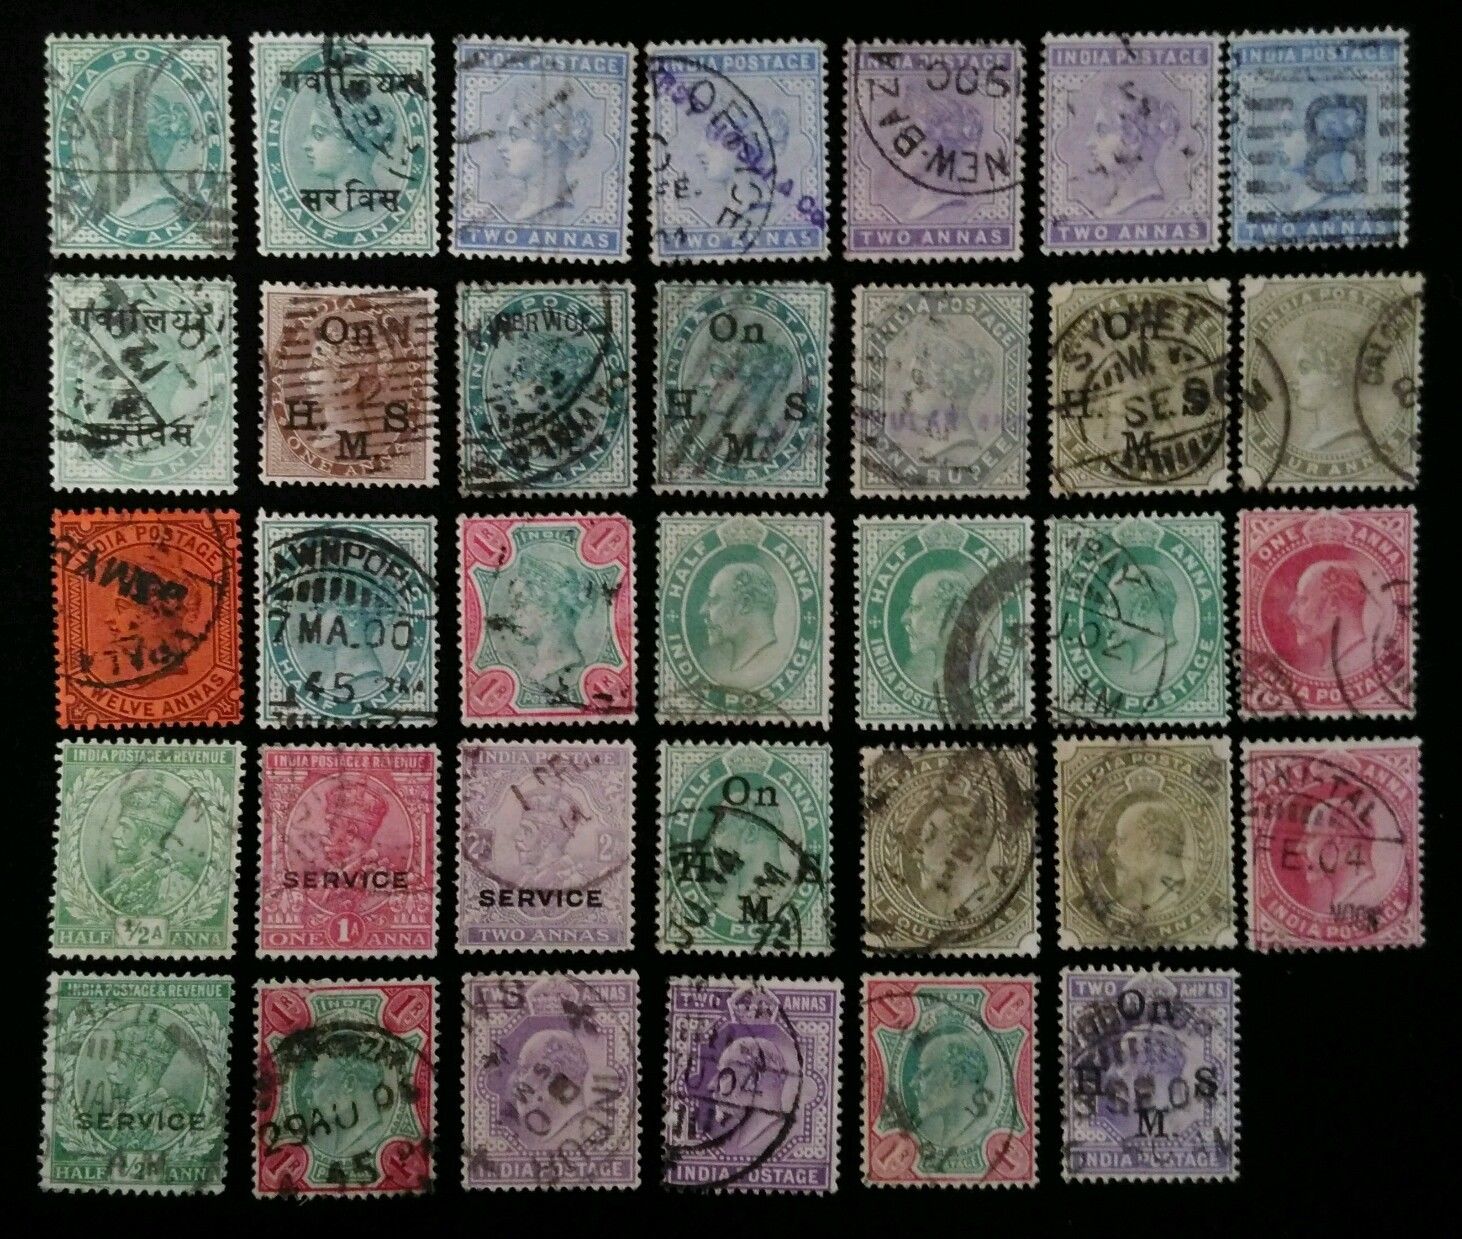 British India Stamps - Good lot of 34 Fine Used Stamps